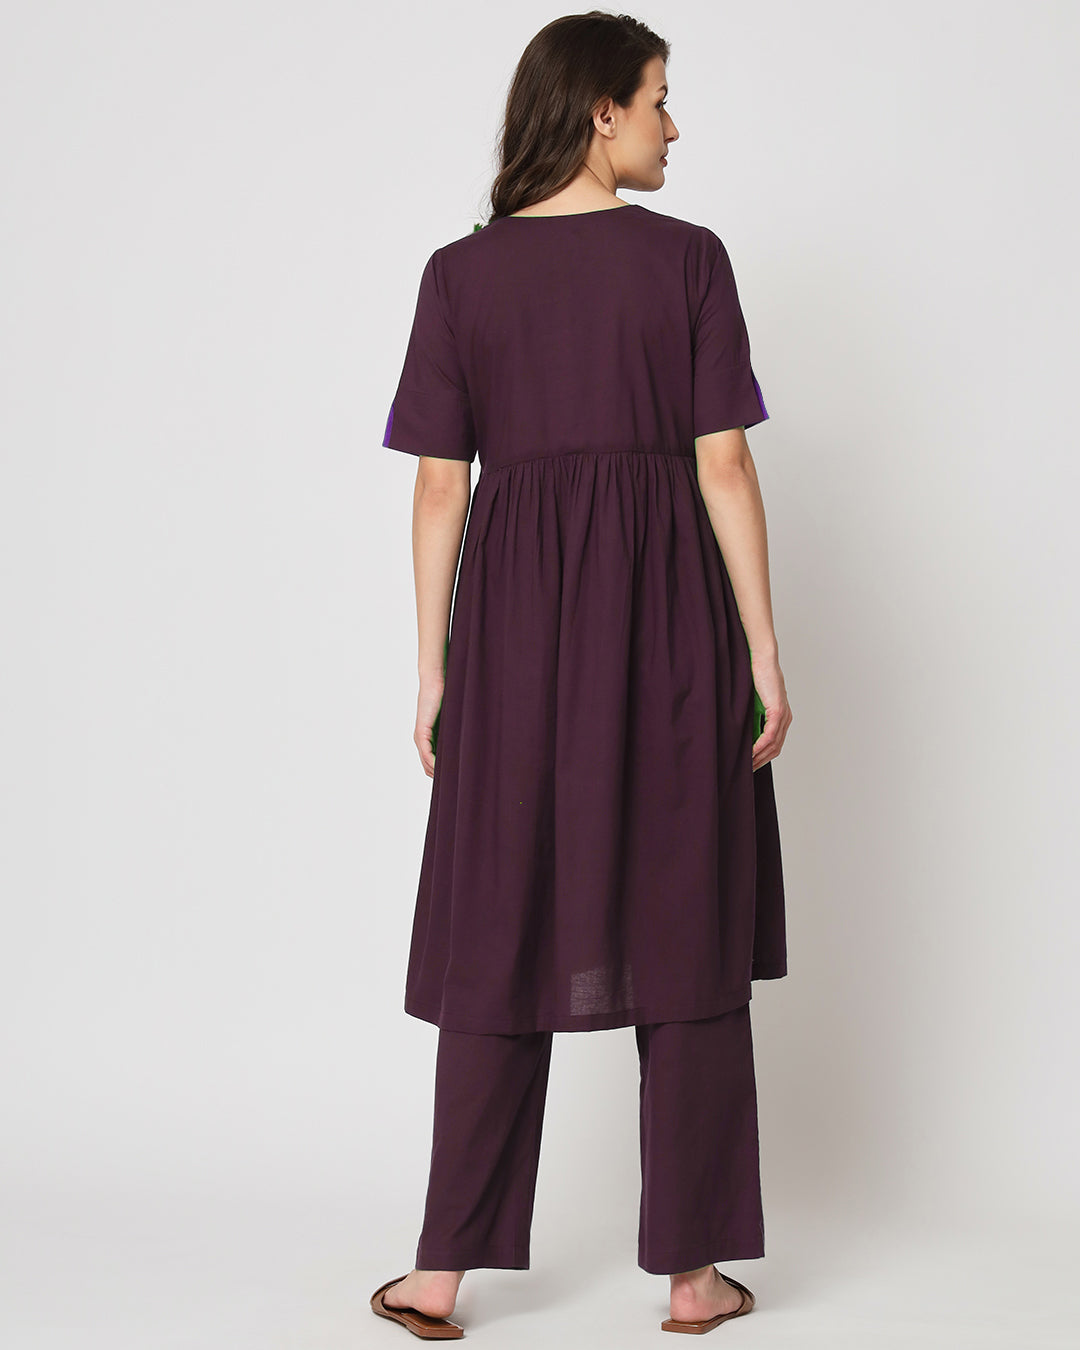 Plum Passion Gathered Solid Co-ord Set